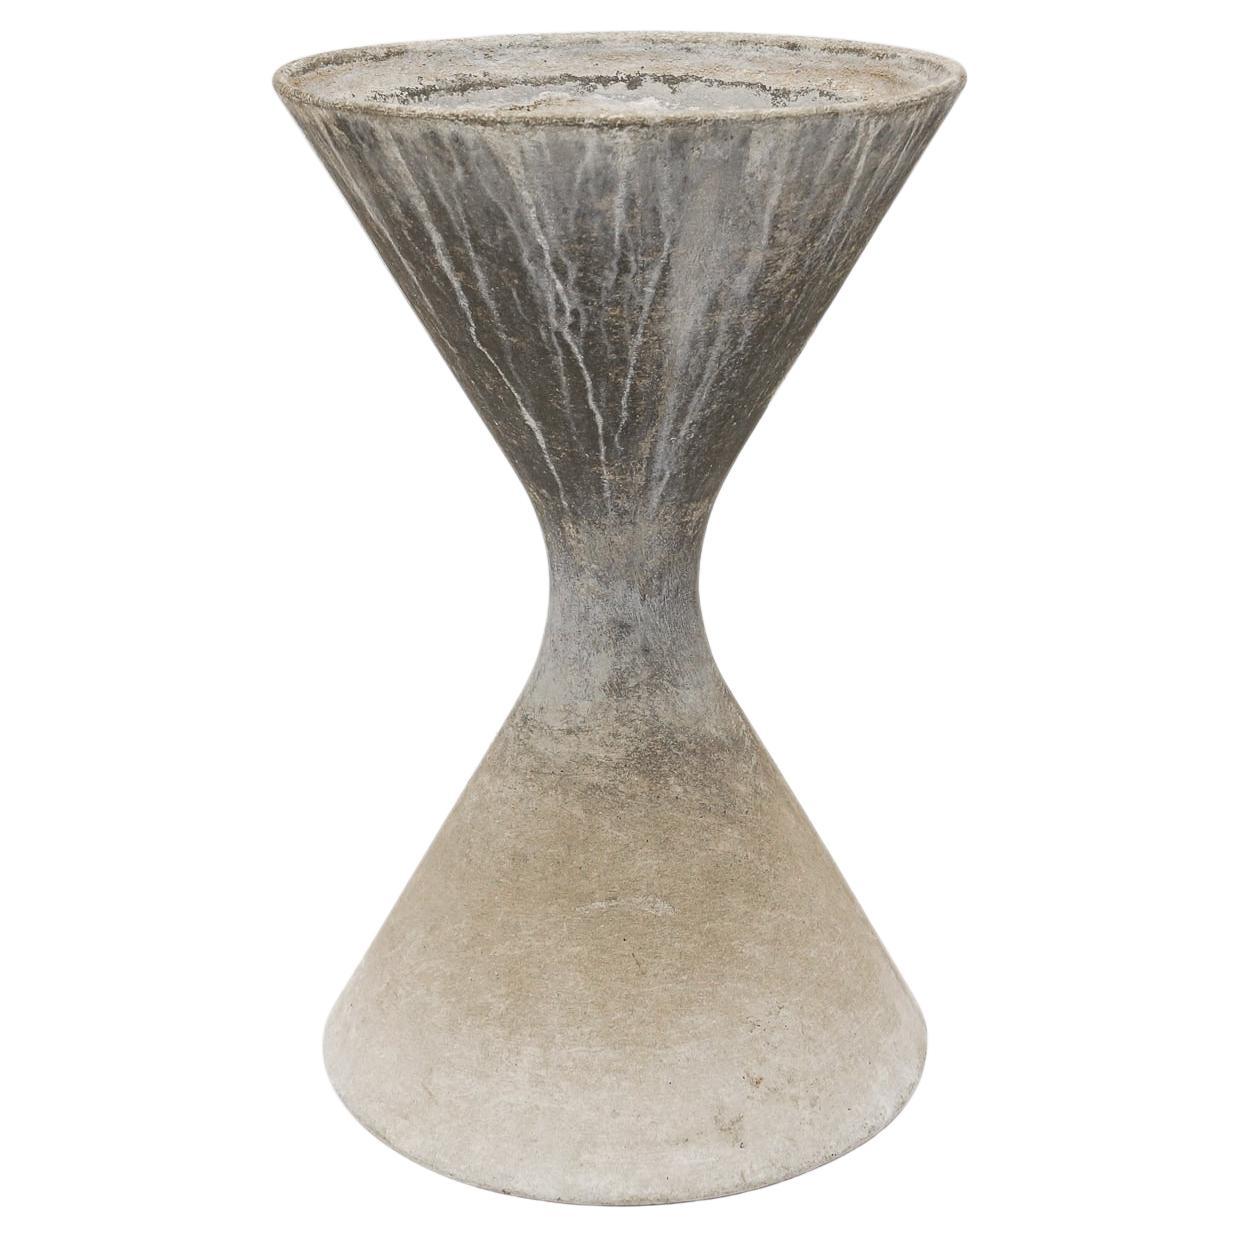 Hourglass "Diabolo" Planter by Willy Guhl and Anton Bee, 1950s Switzerland For Sale